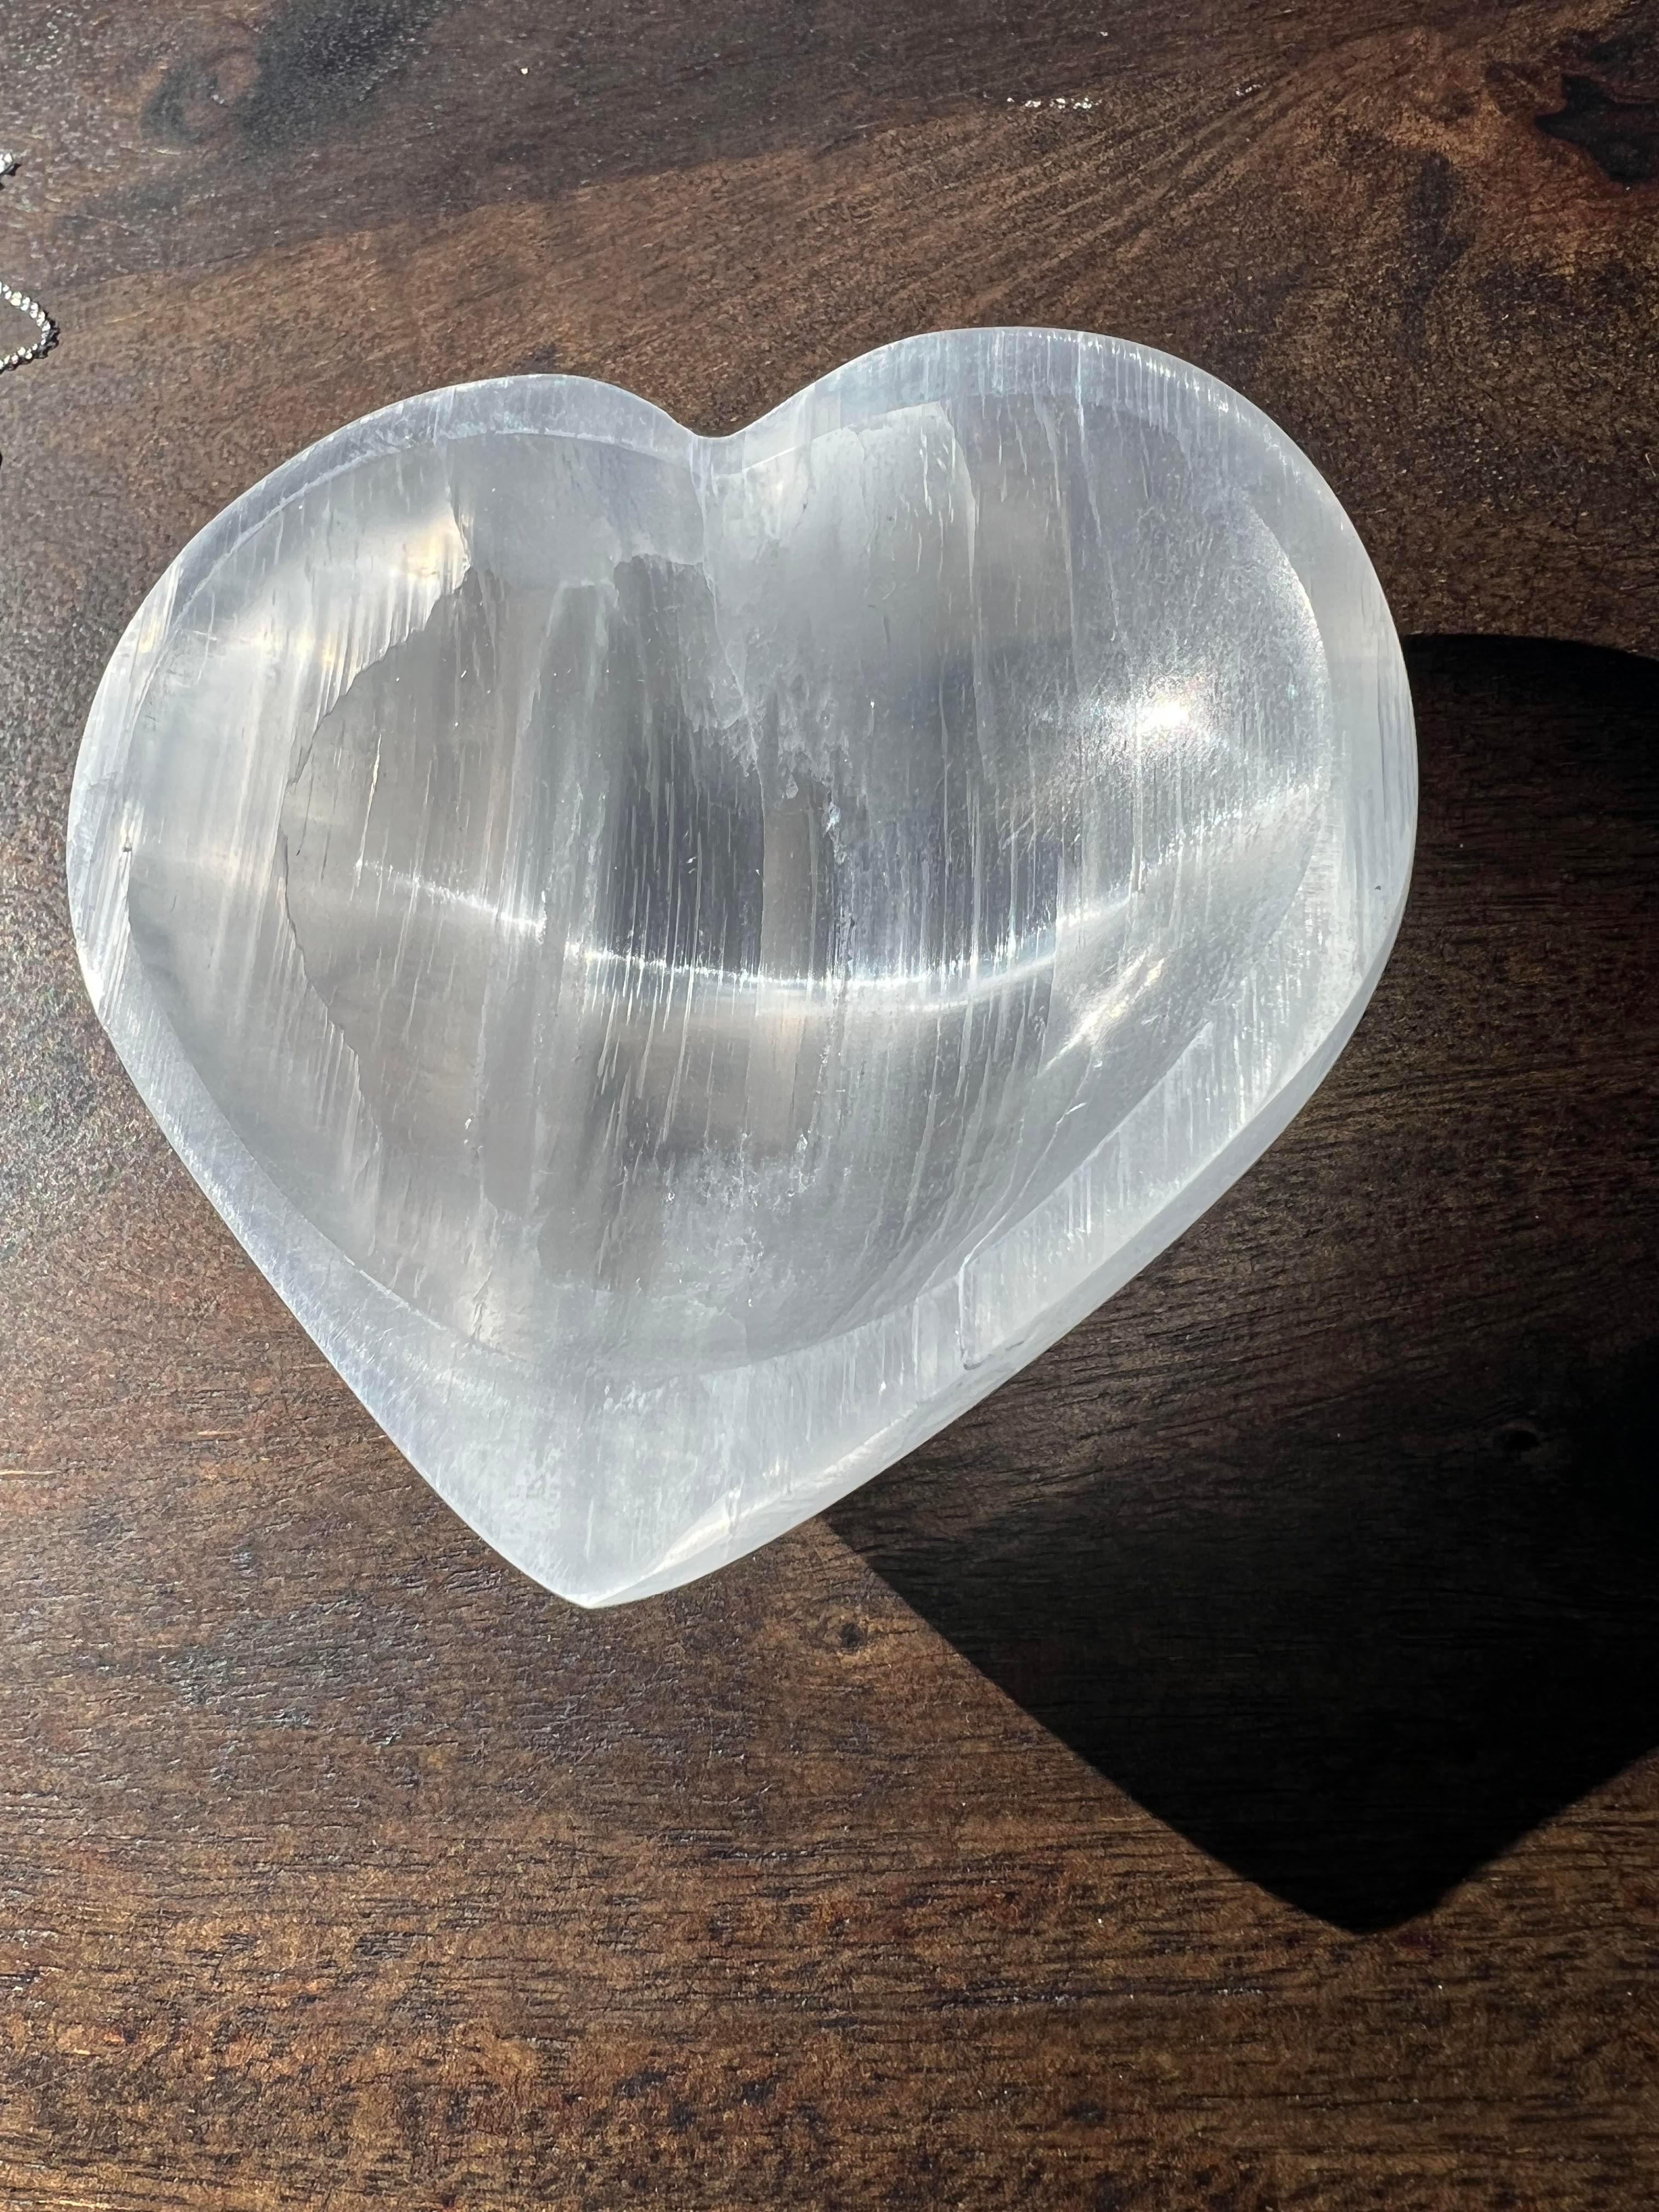 Crystal Charging Bowl in Heart Shape Healing Ability Selenite Bowls Crystals Stone With 7 Stone Chakra 925 Sterling Silver Chain Pendant - YoTreasure